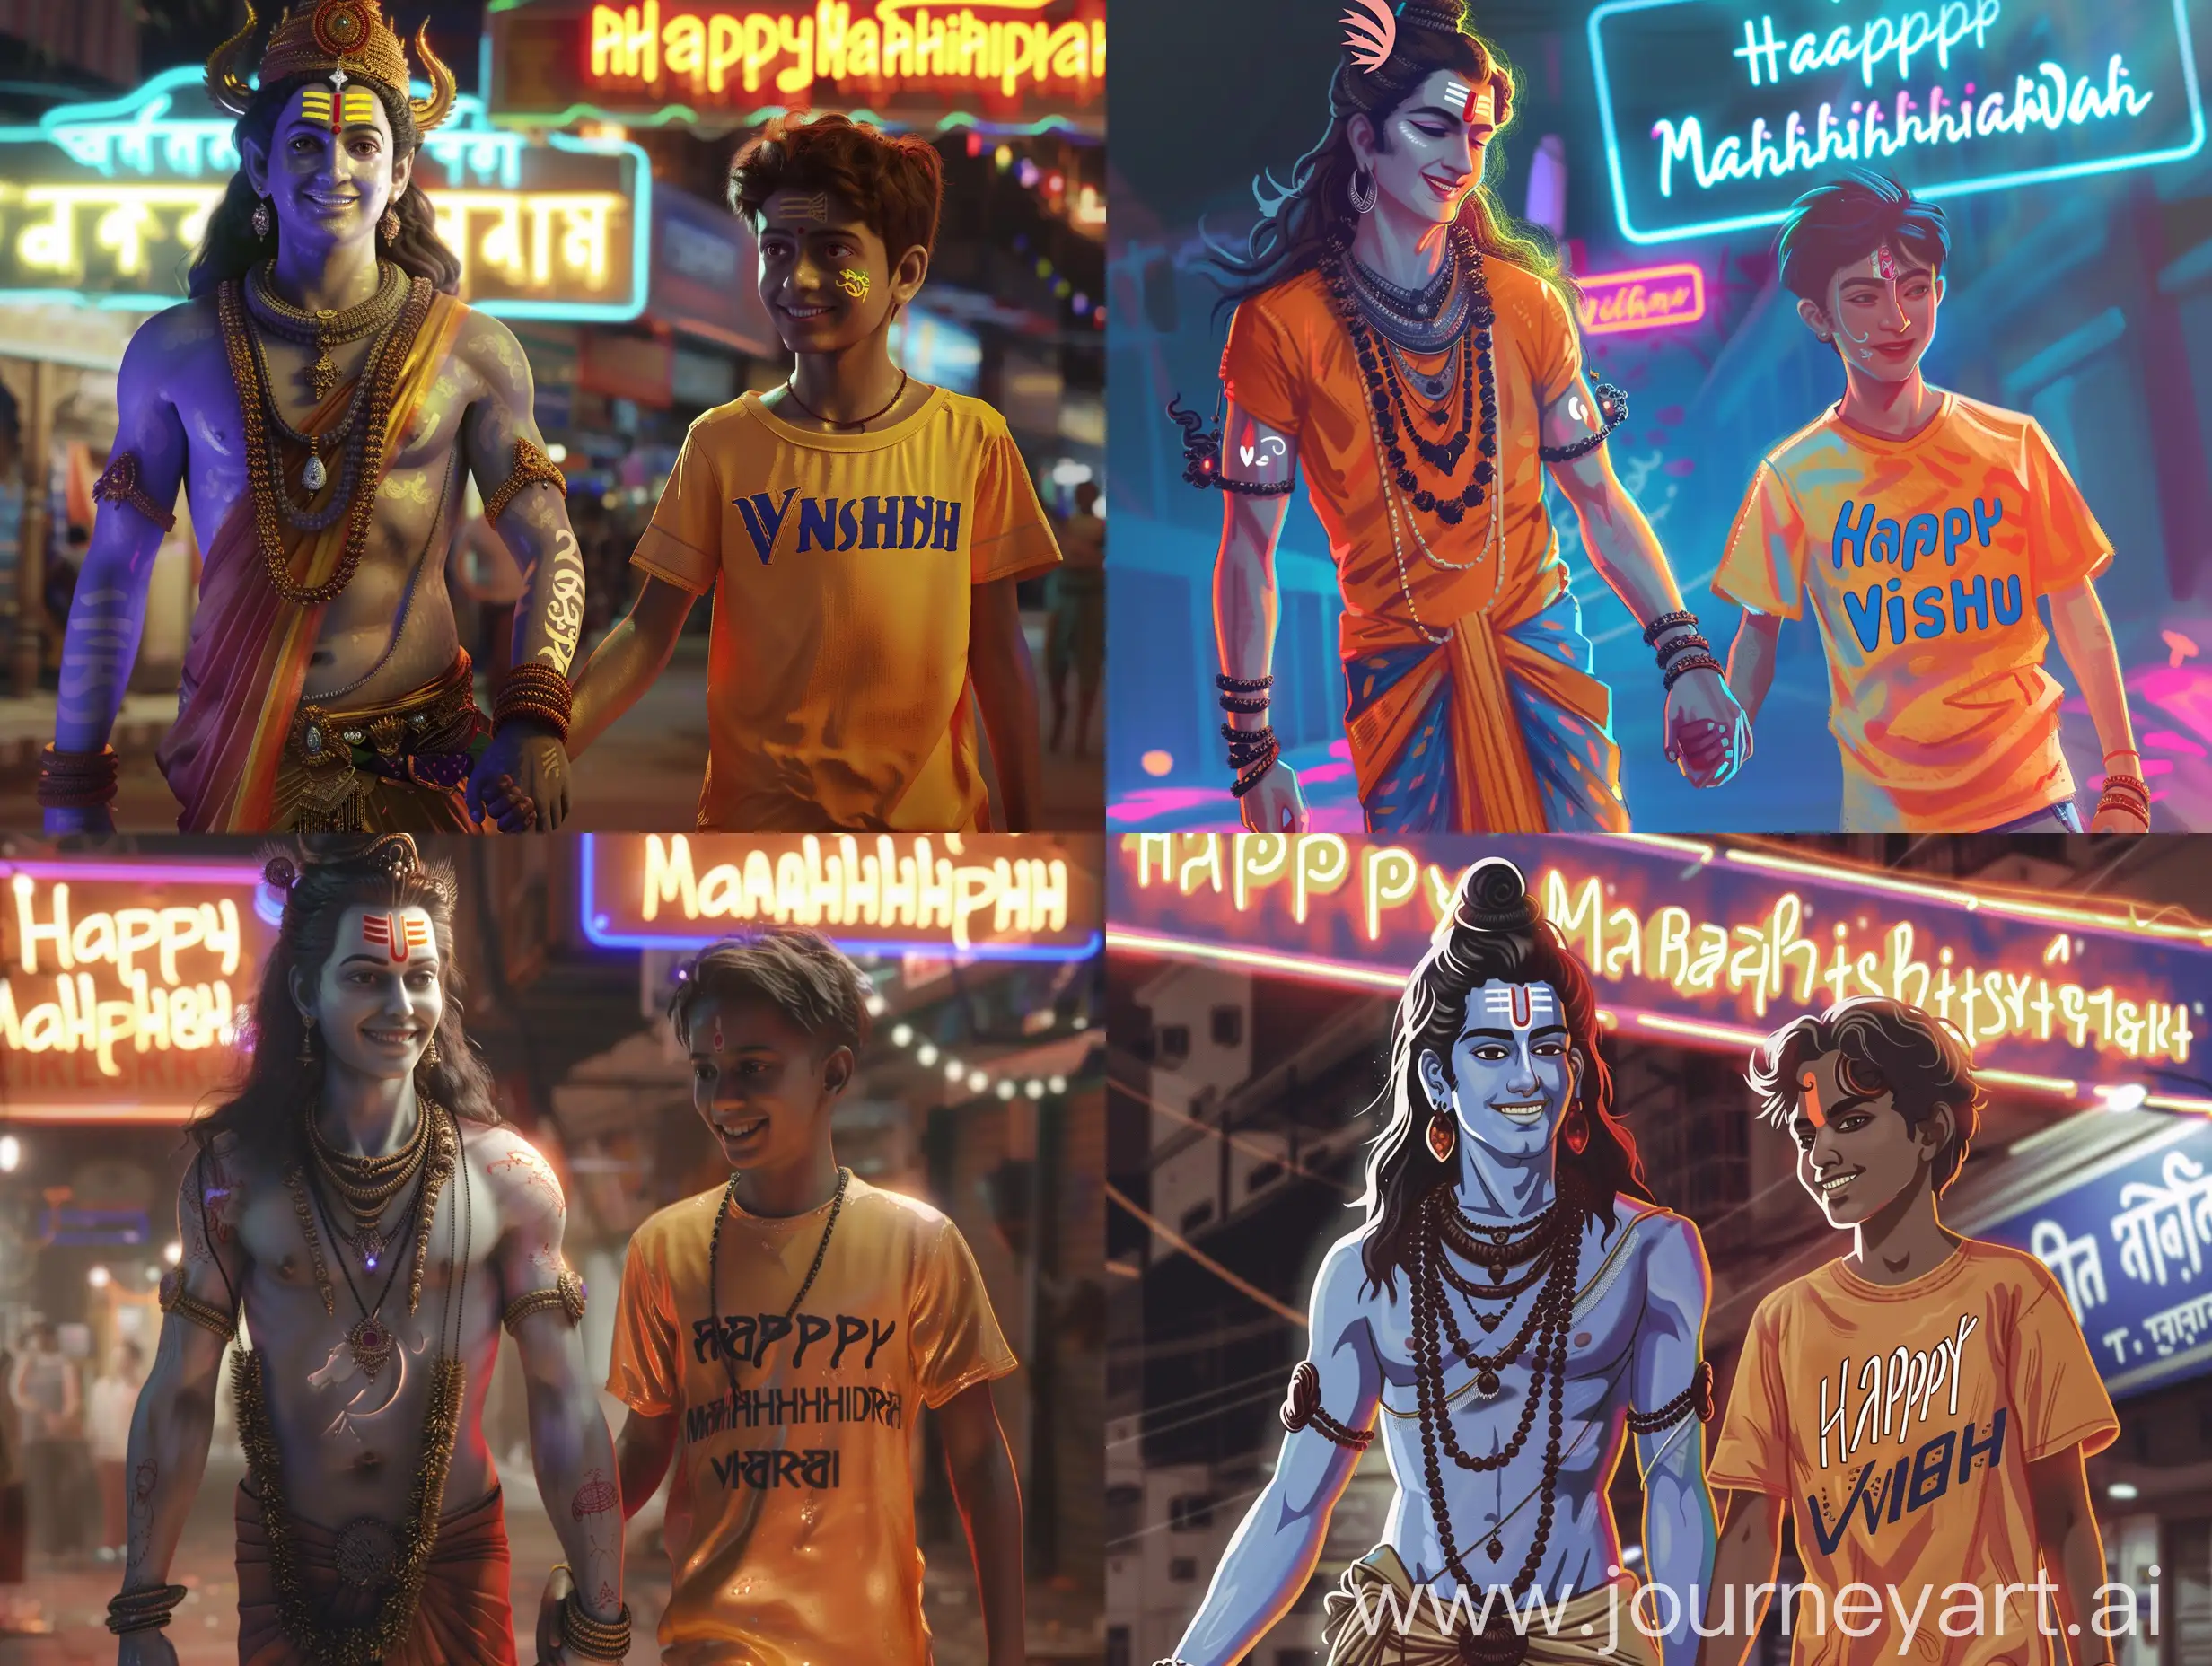 " Create an illusion the 25 year old boy closeup of lord Mahadev holding hand walking with a 20 year old boy wearing a saffron tshirt written name " Vishnu " Big and capital font. both smiling. Background neon labels proudly display the caption " Happy Mahashivratri " , soft light reflection